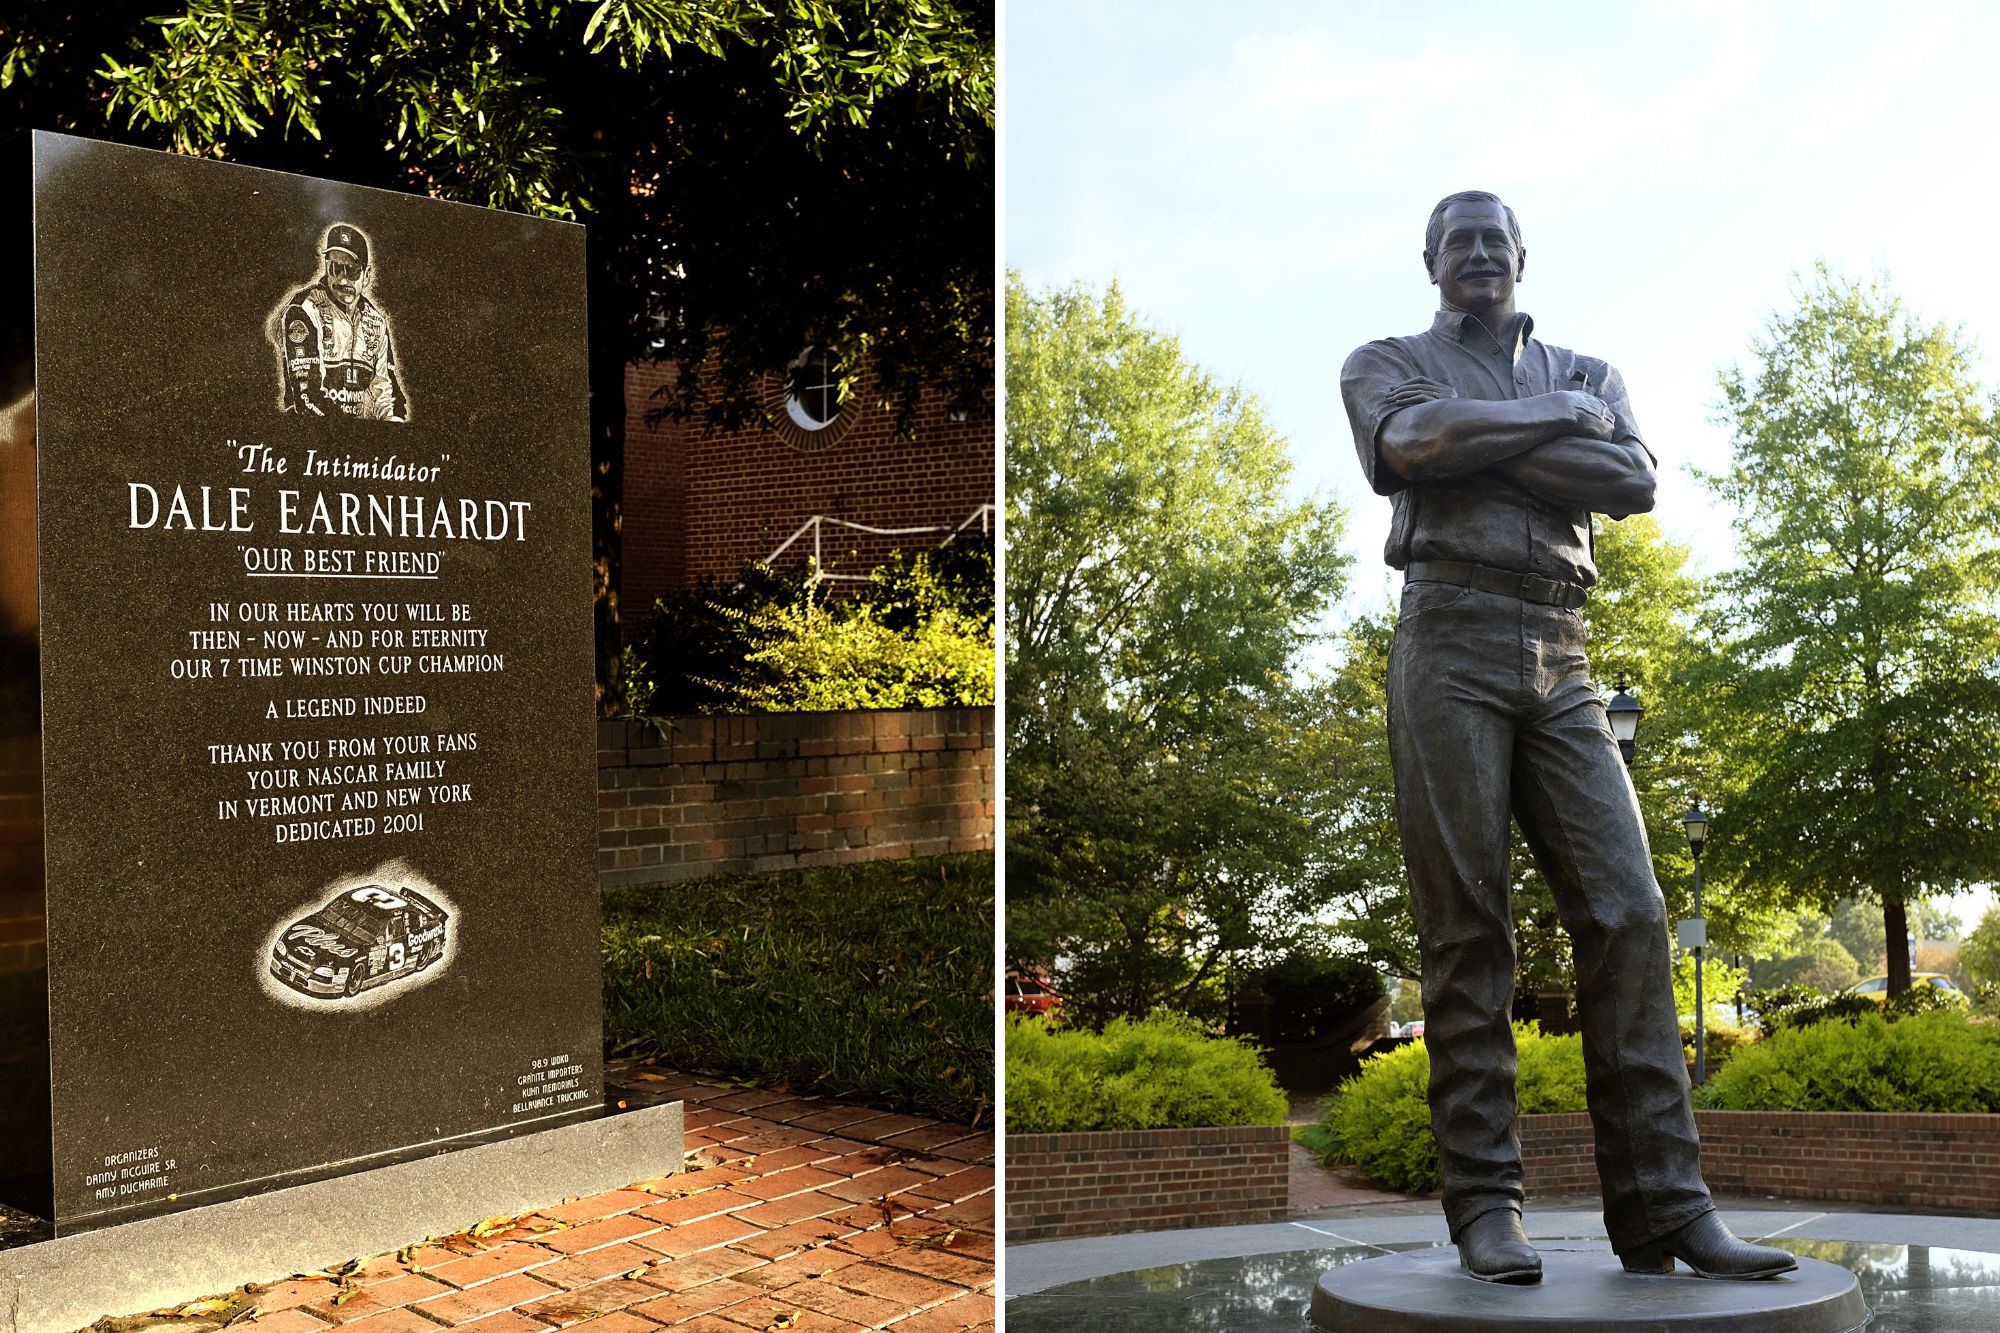 Plaque and Statue honoring Dale Earnhardt in Kannapolis